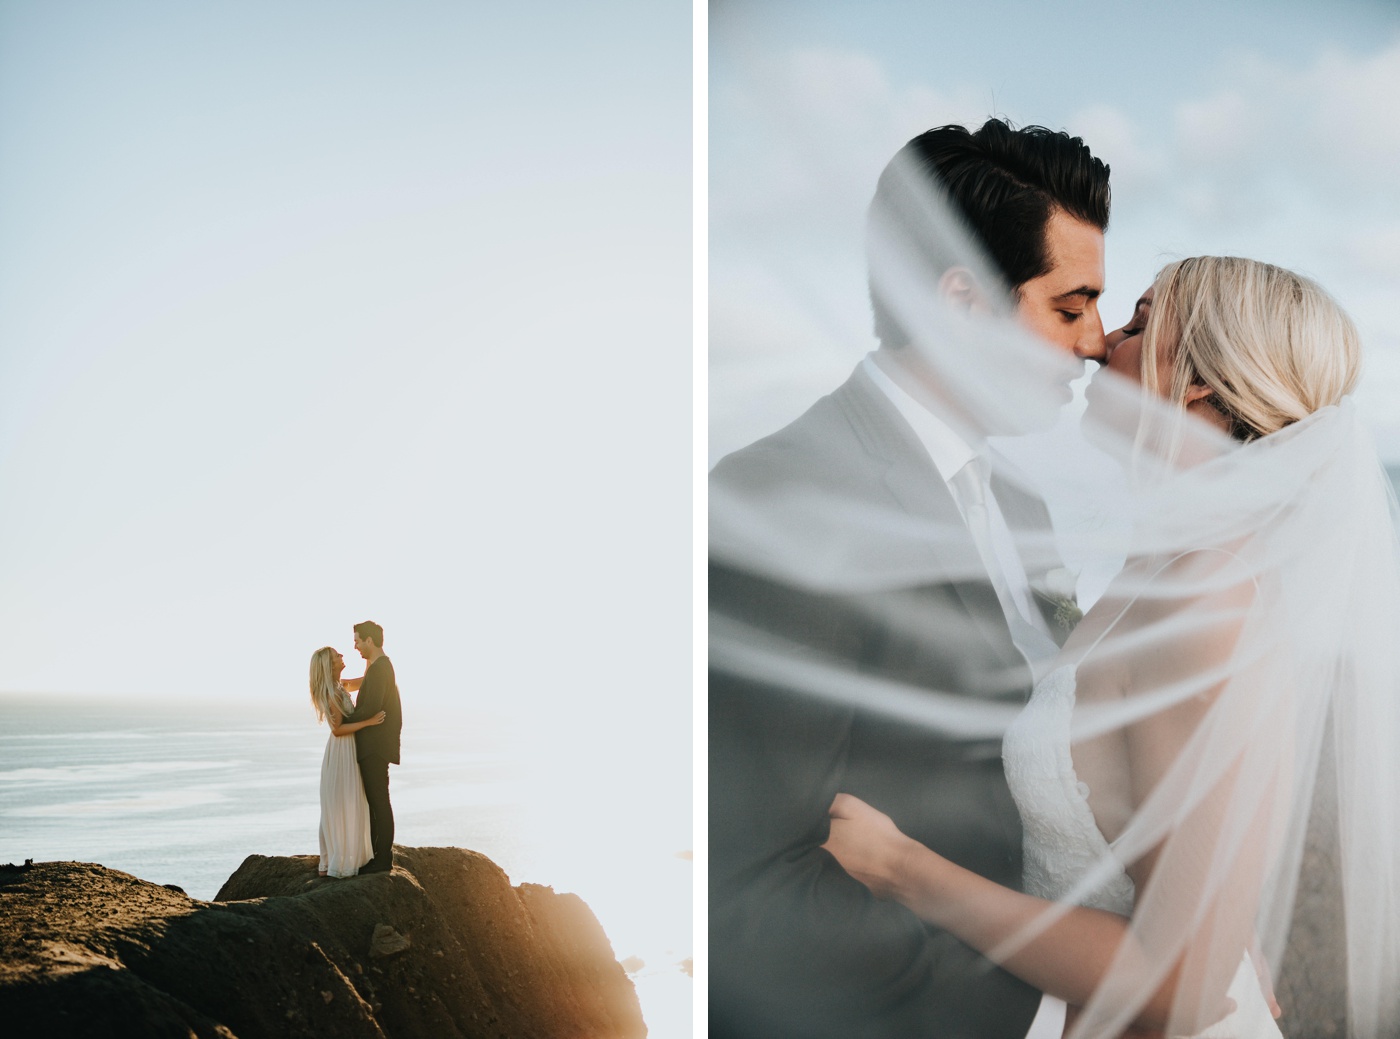 Bridal portraits on a cliff overlooking the ocean